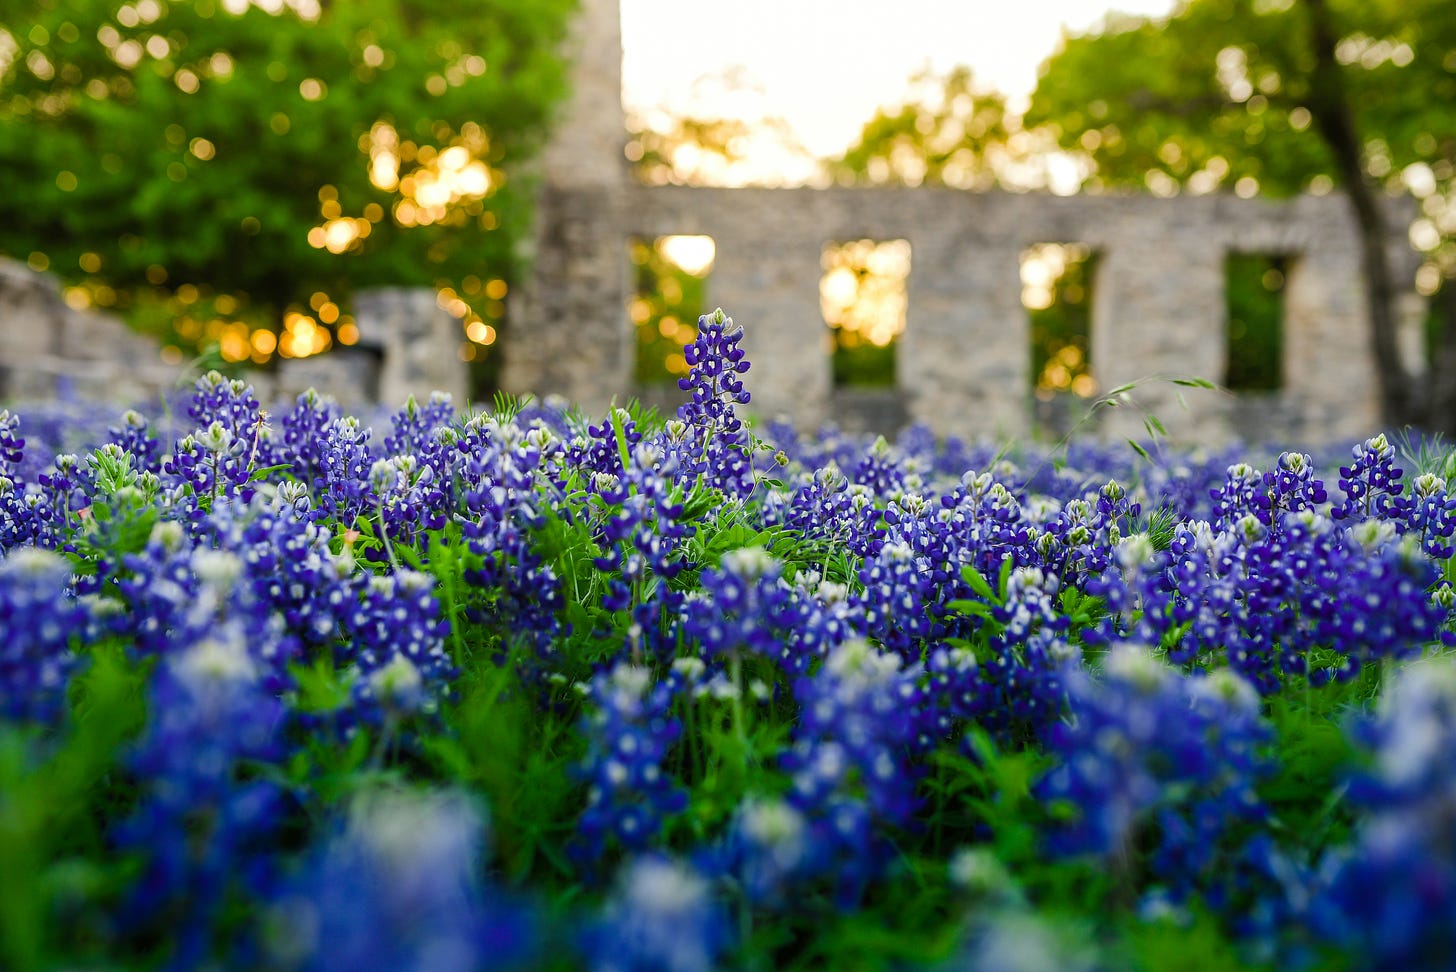 Image of bluebonnets at sunset with an old ruin structure behind.